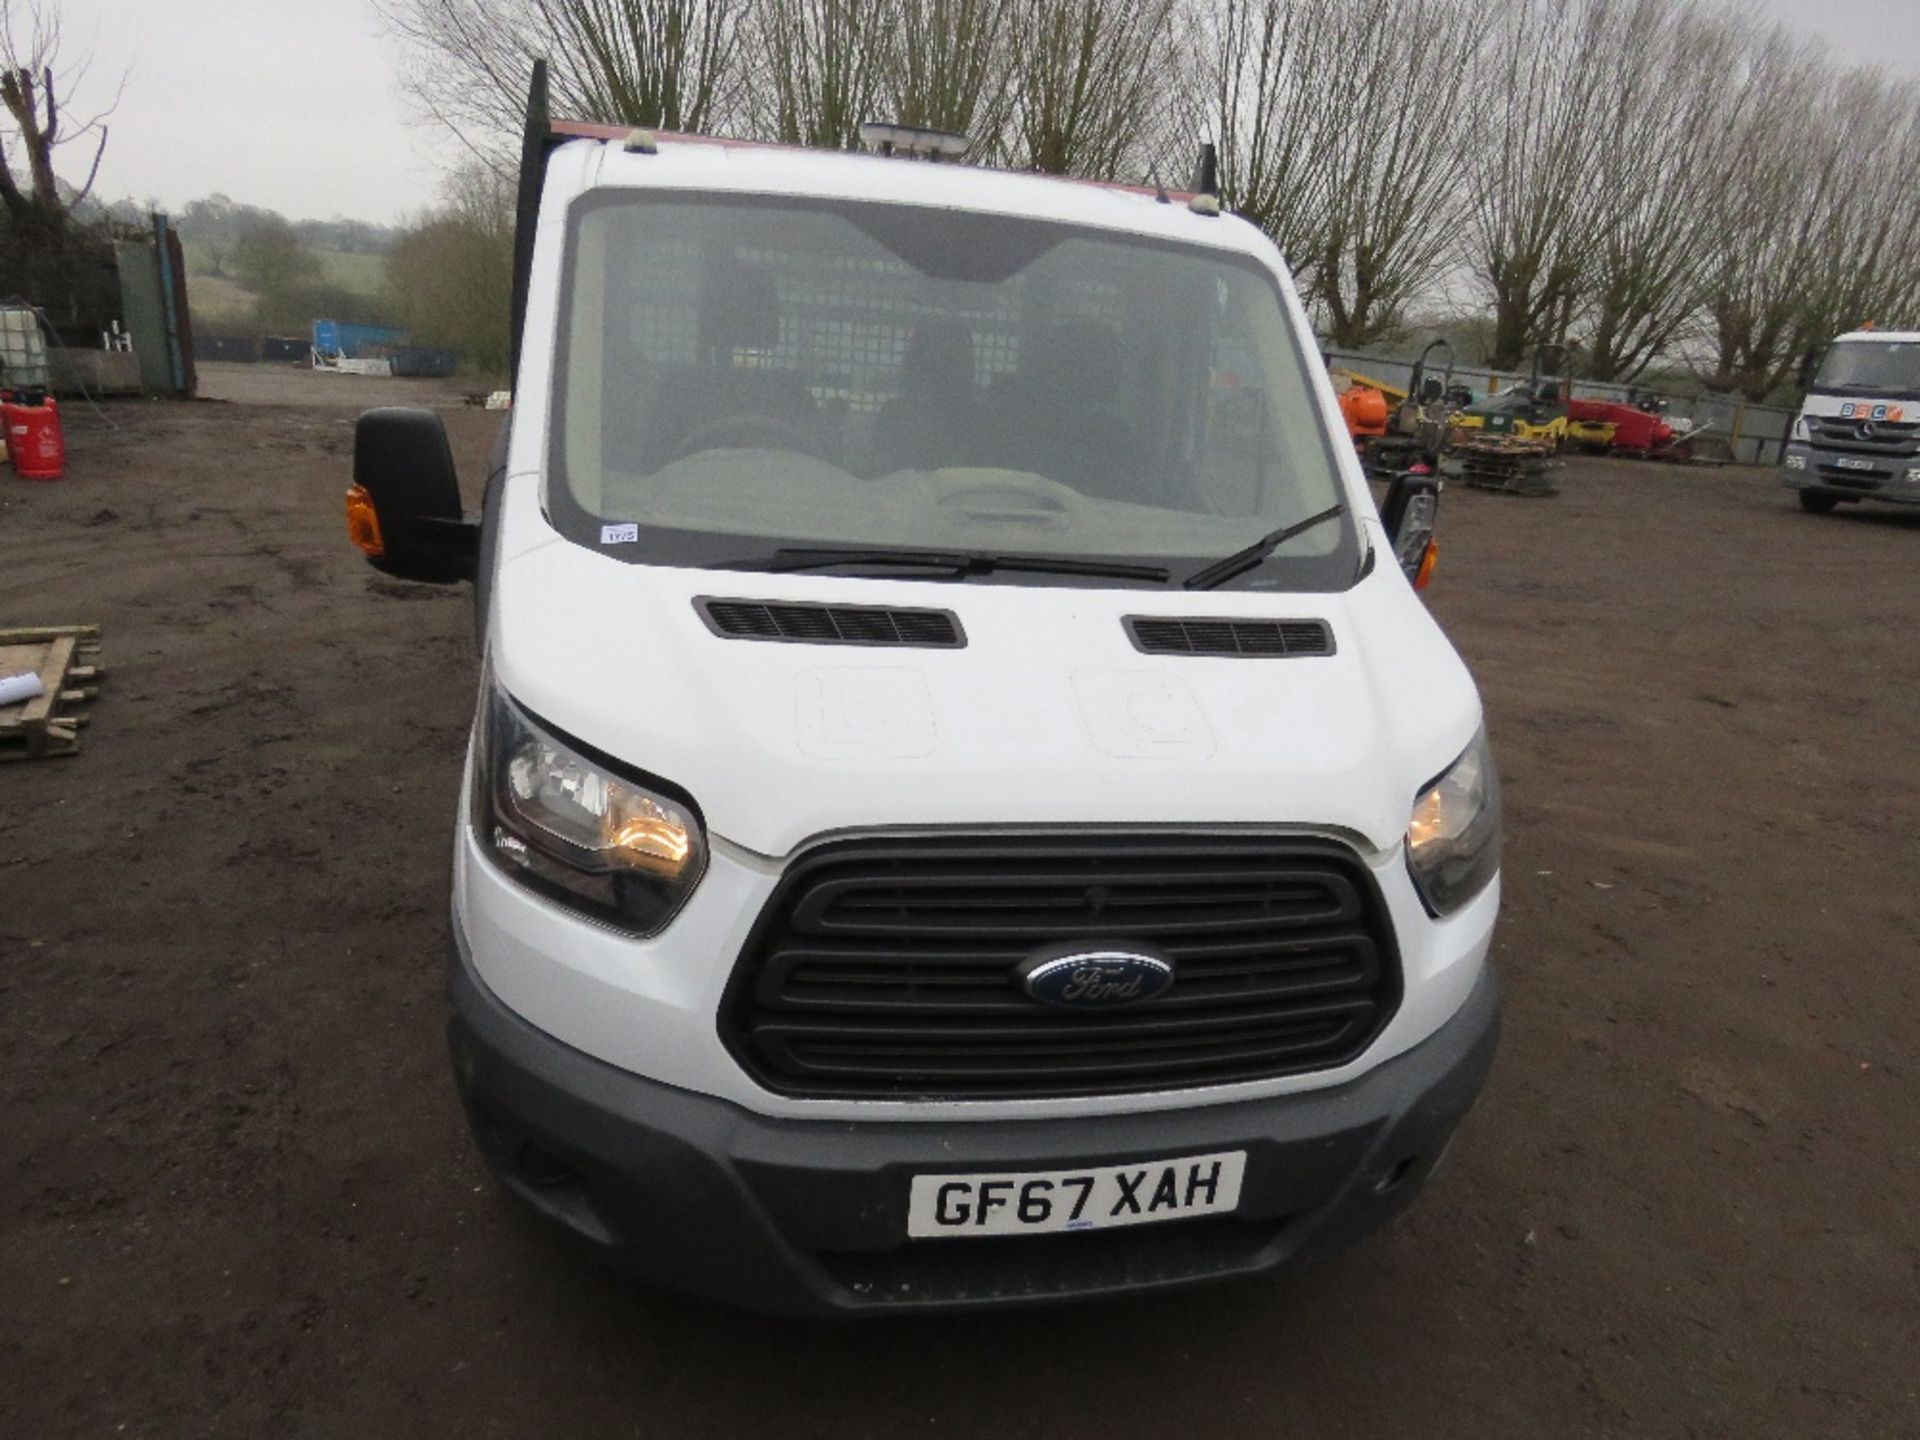 FORD TRANSIT DROP SIDE TRUCK REG:GF67 XAH. 147,016 REC MILES. WITH V5 AND MOT 17/11/24 FIRST REGIST